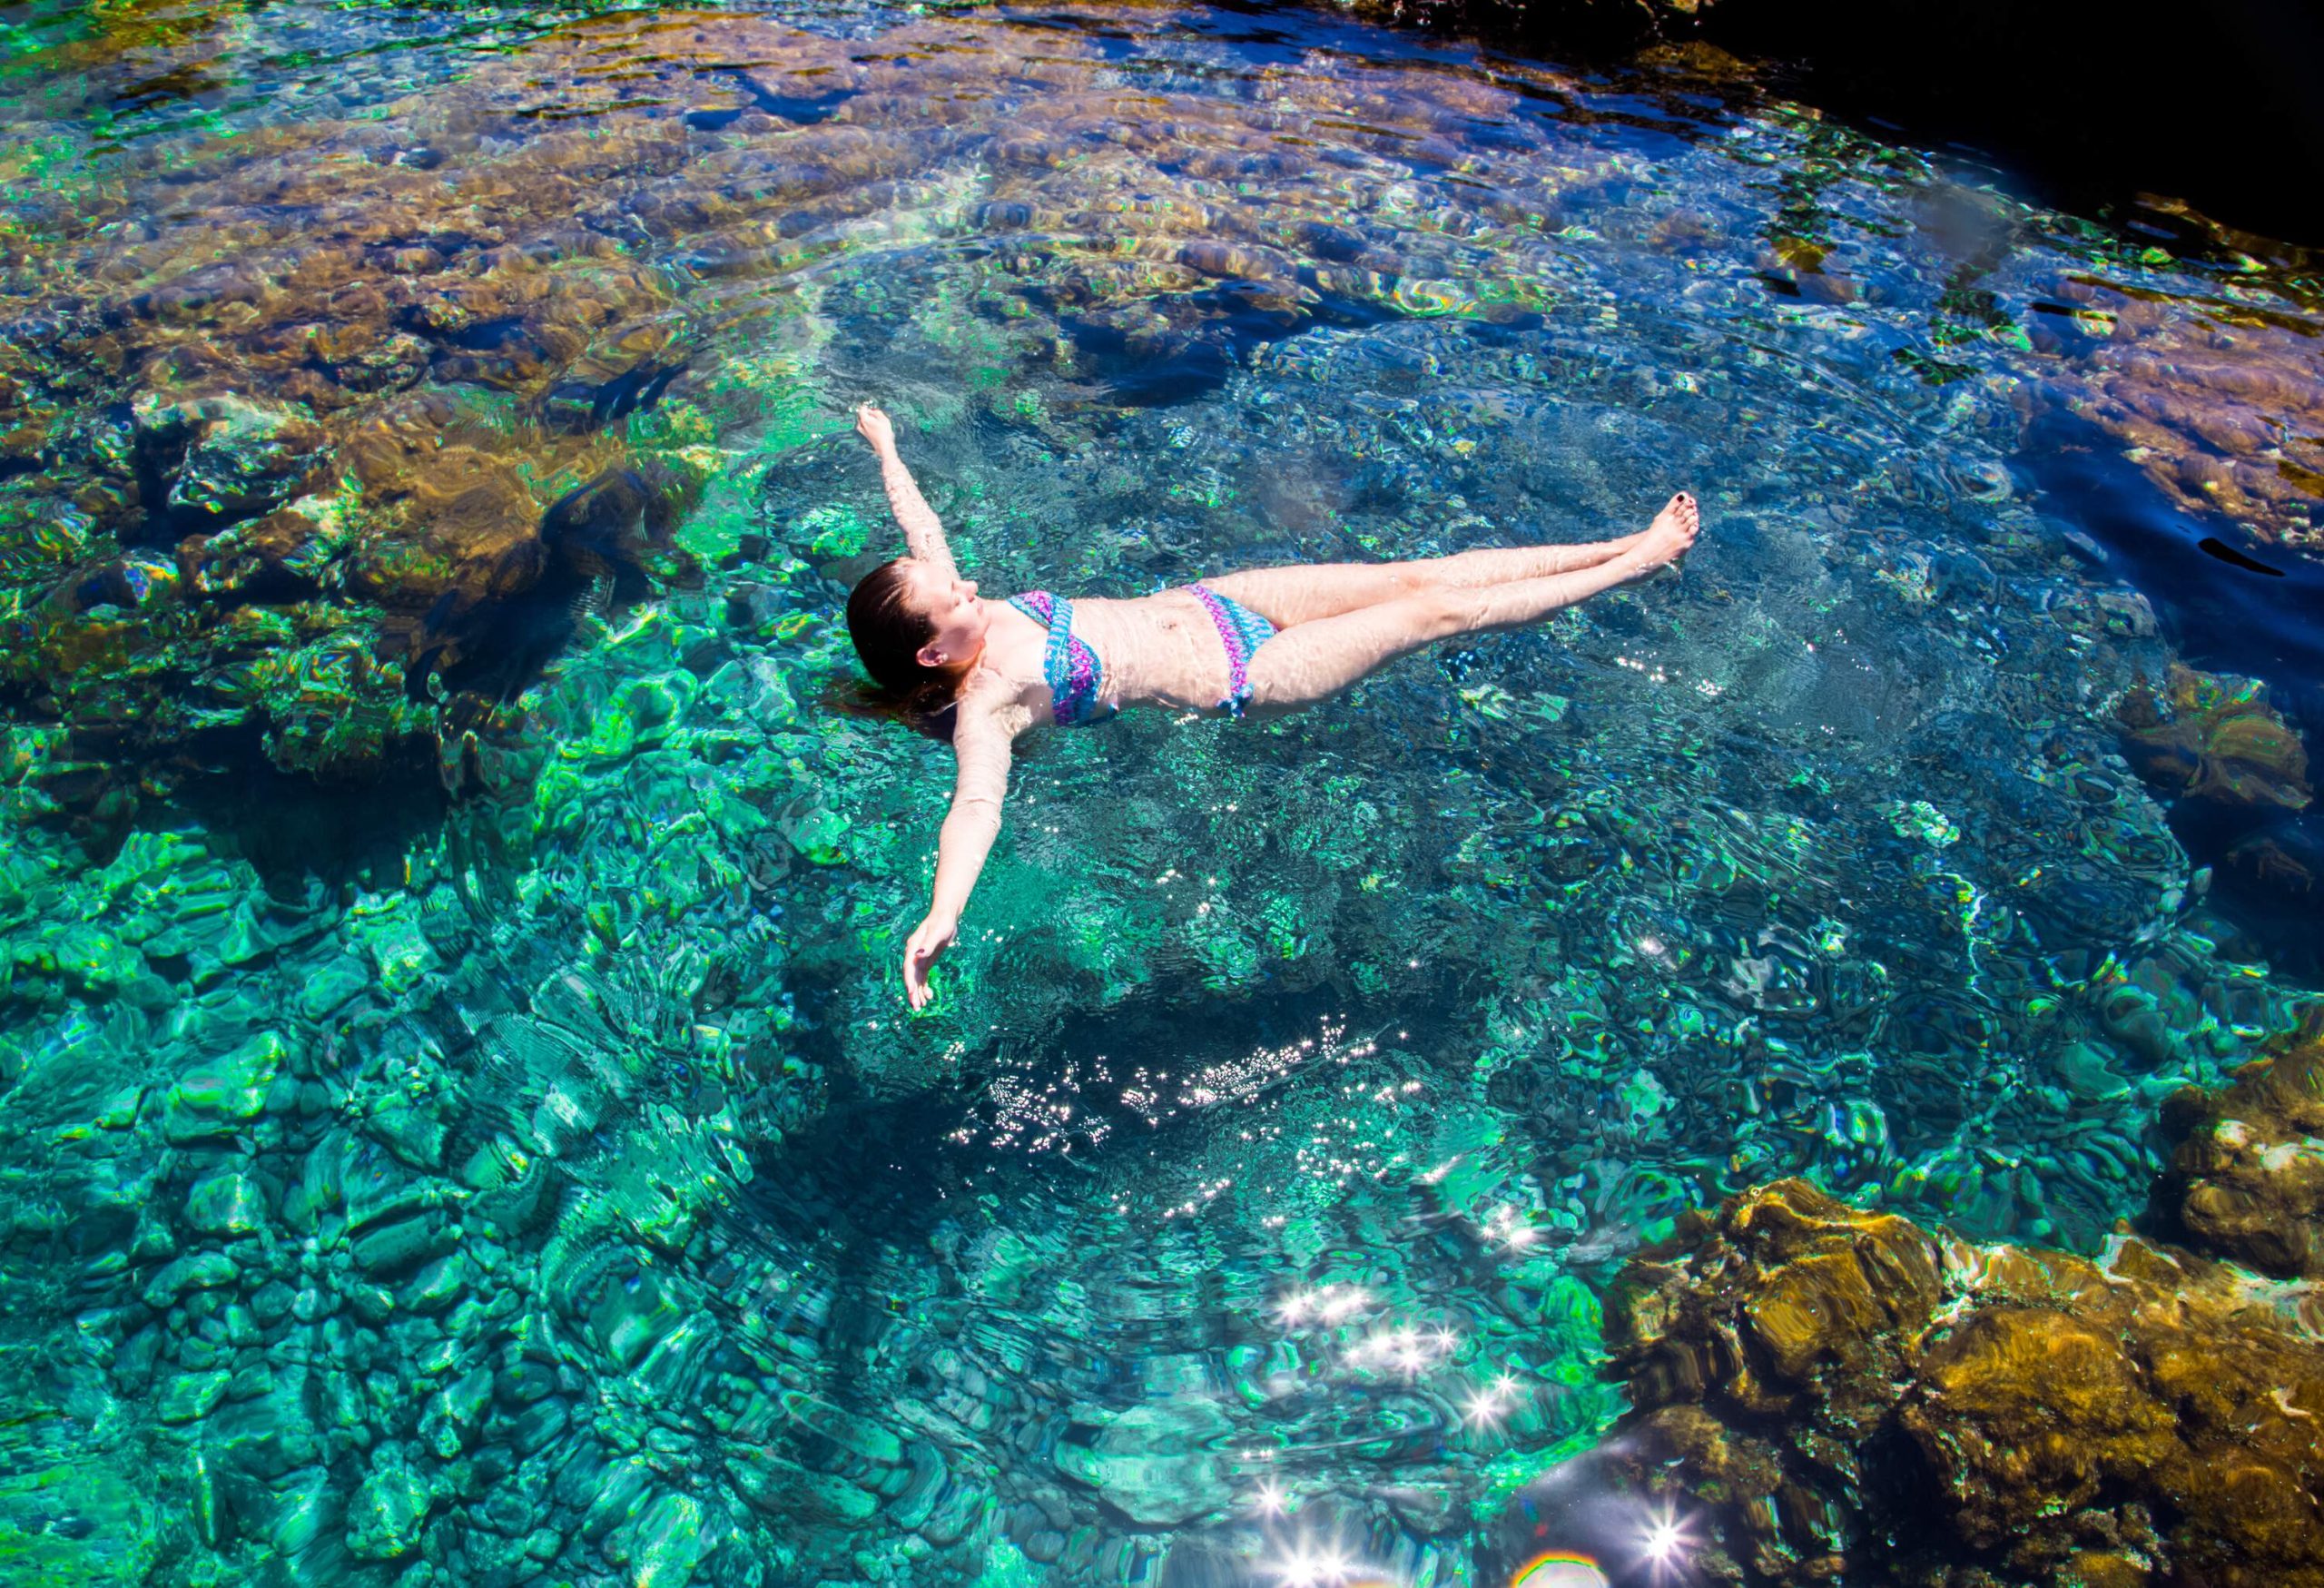 A person in a two-piece bikini is floating over crystal-clear water where the seafloor can be seen.